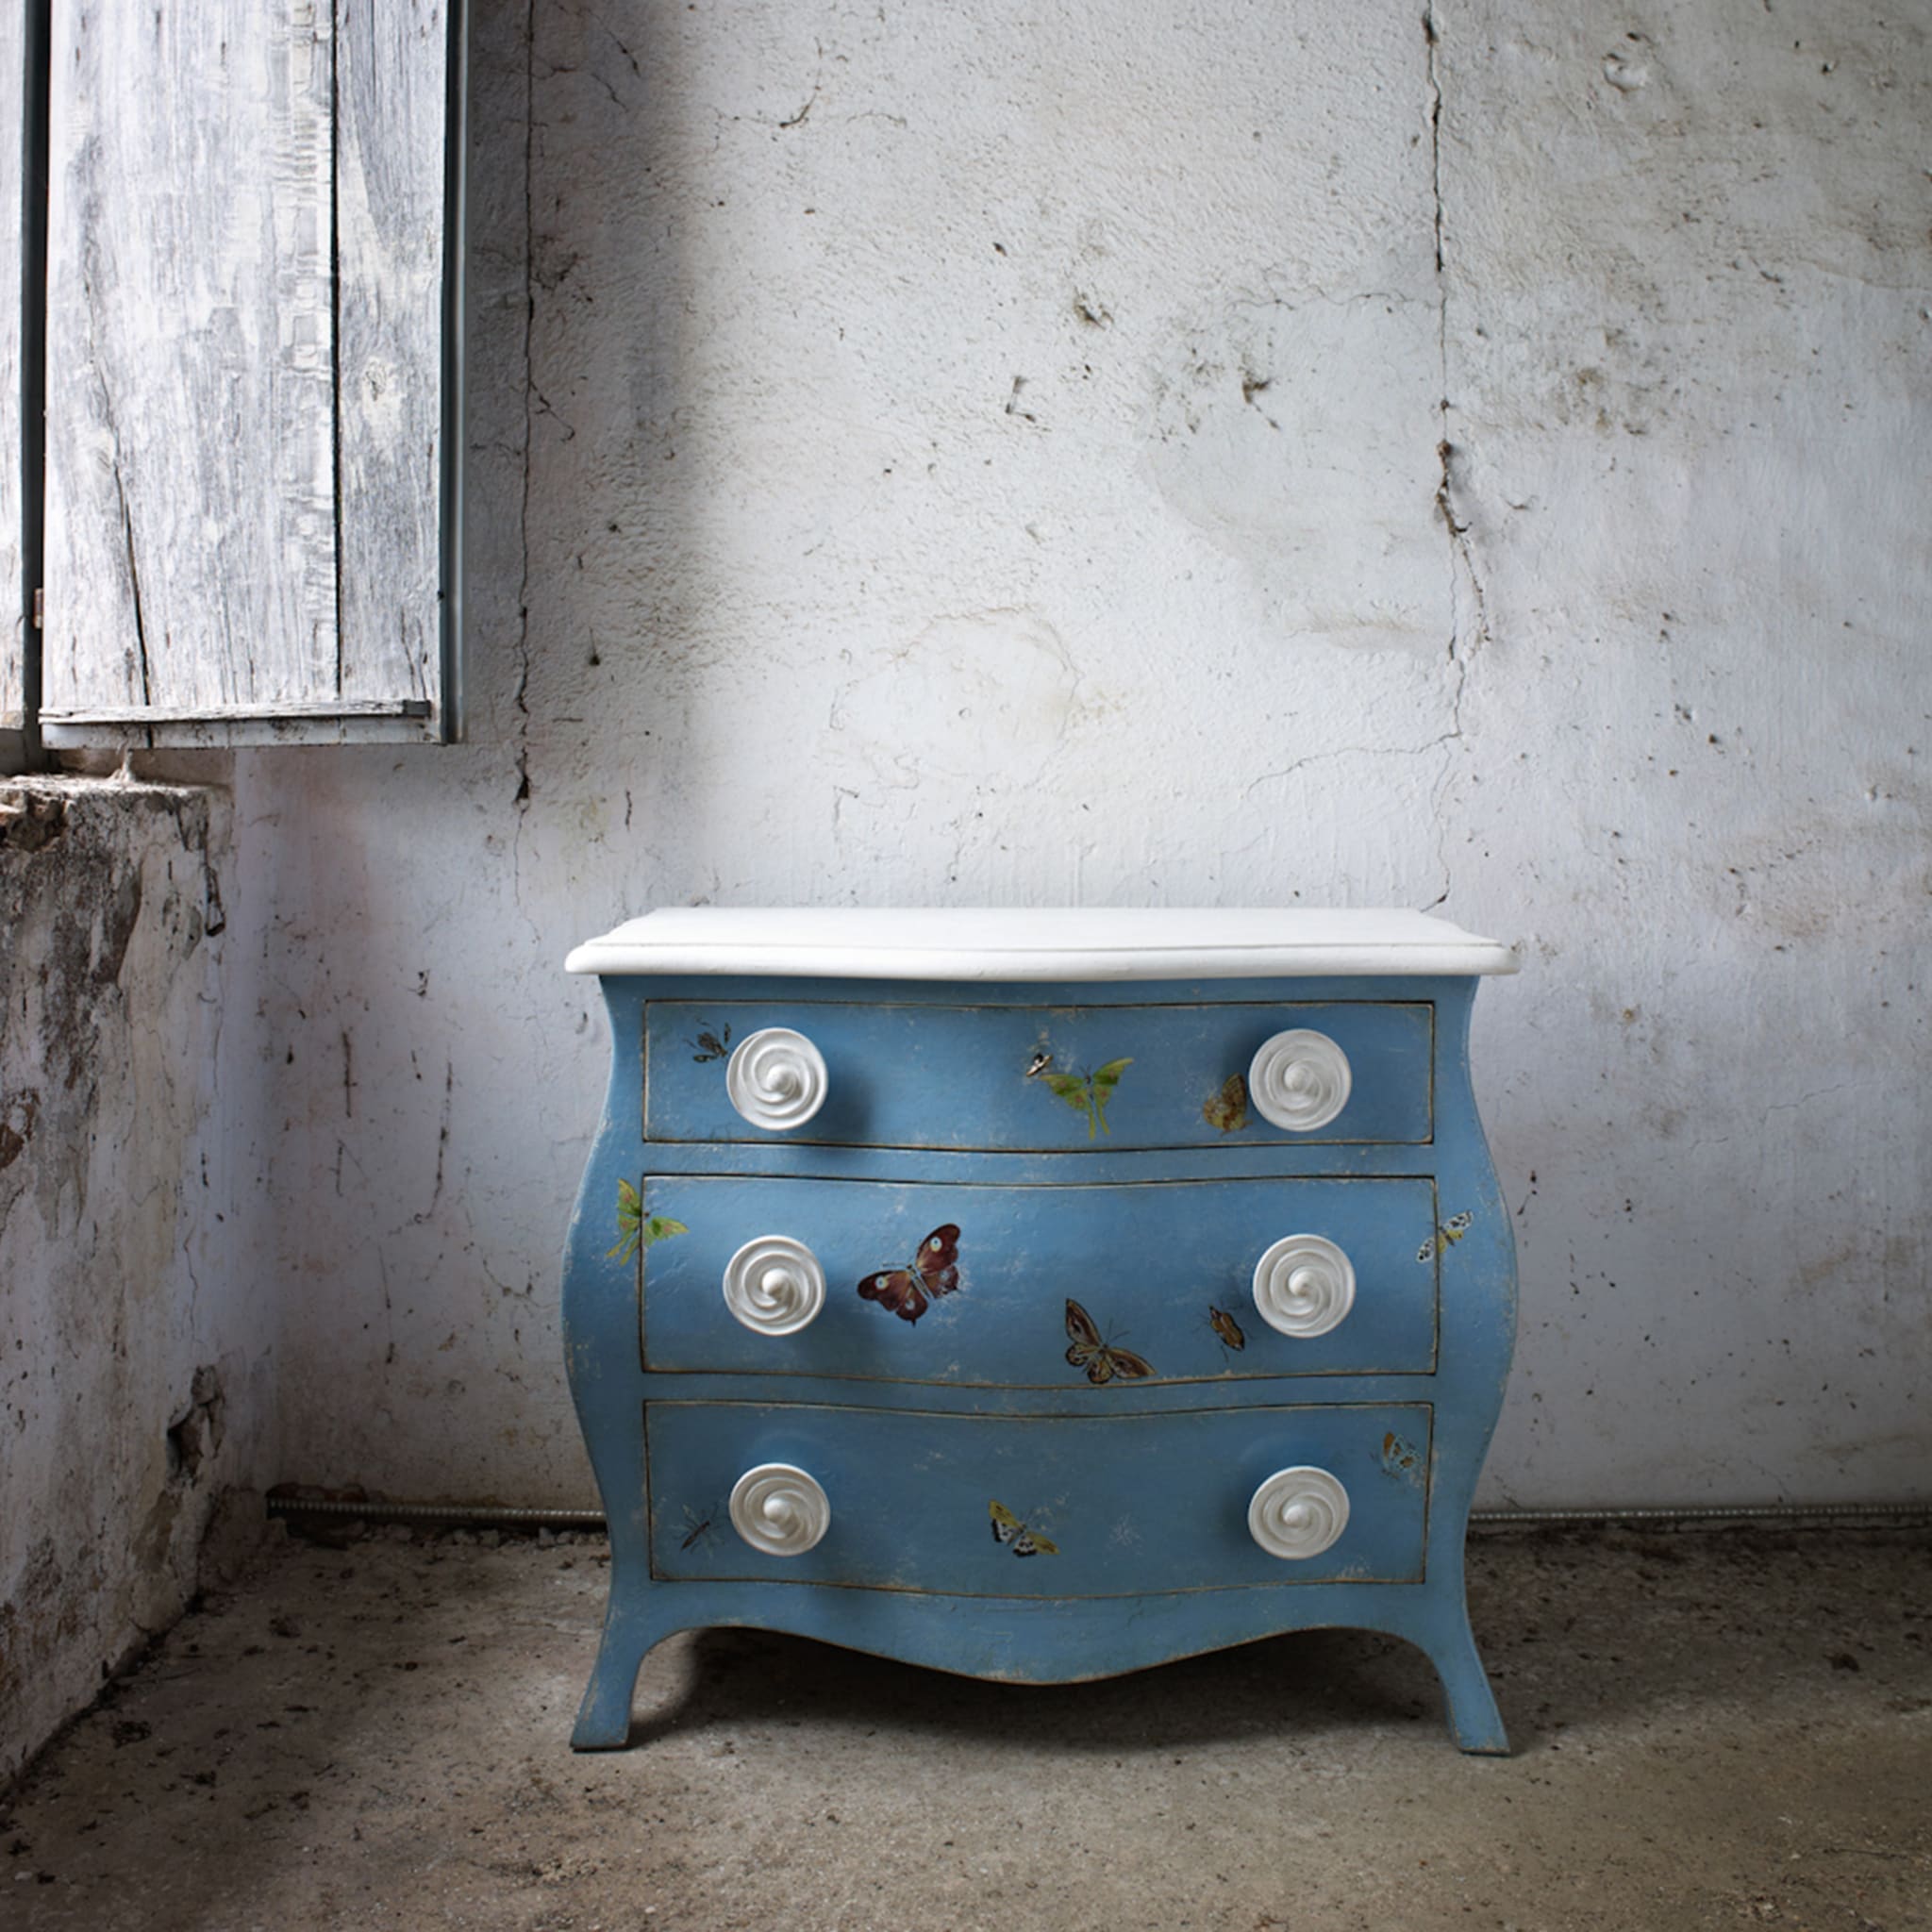 Asolo Parma Blue Chest of Drawers - Alternative view 1